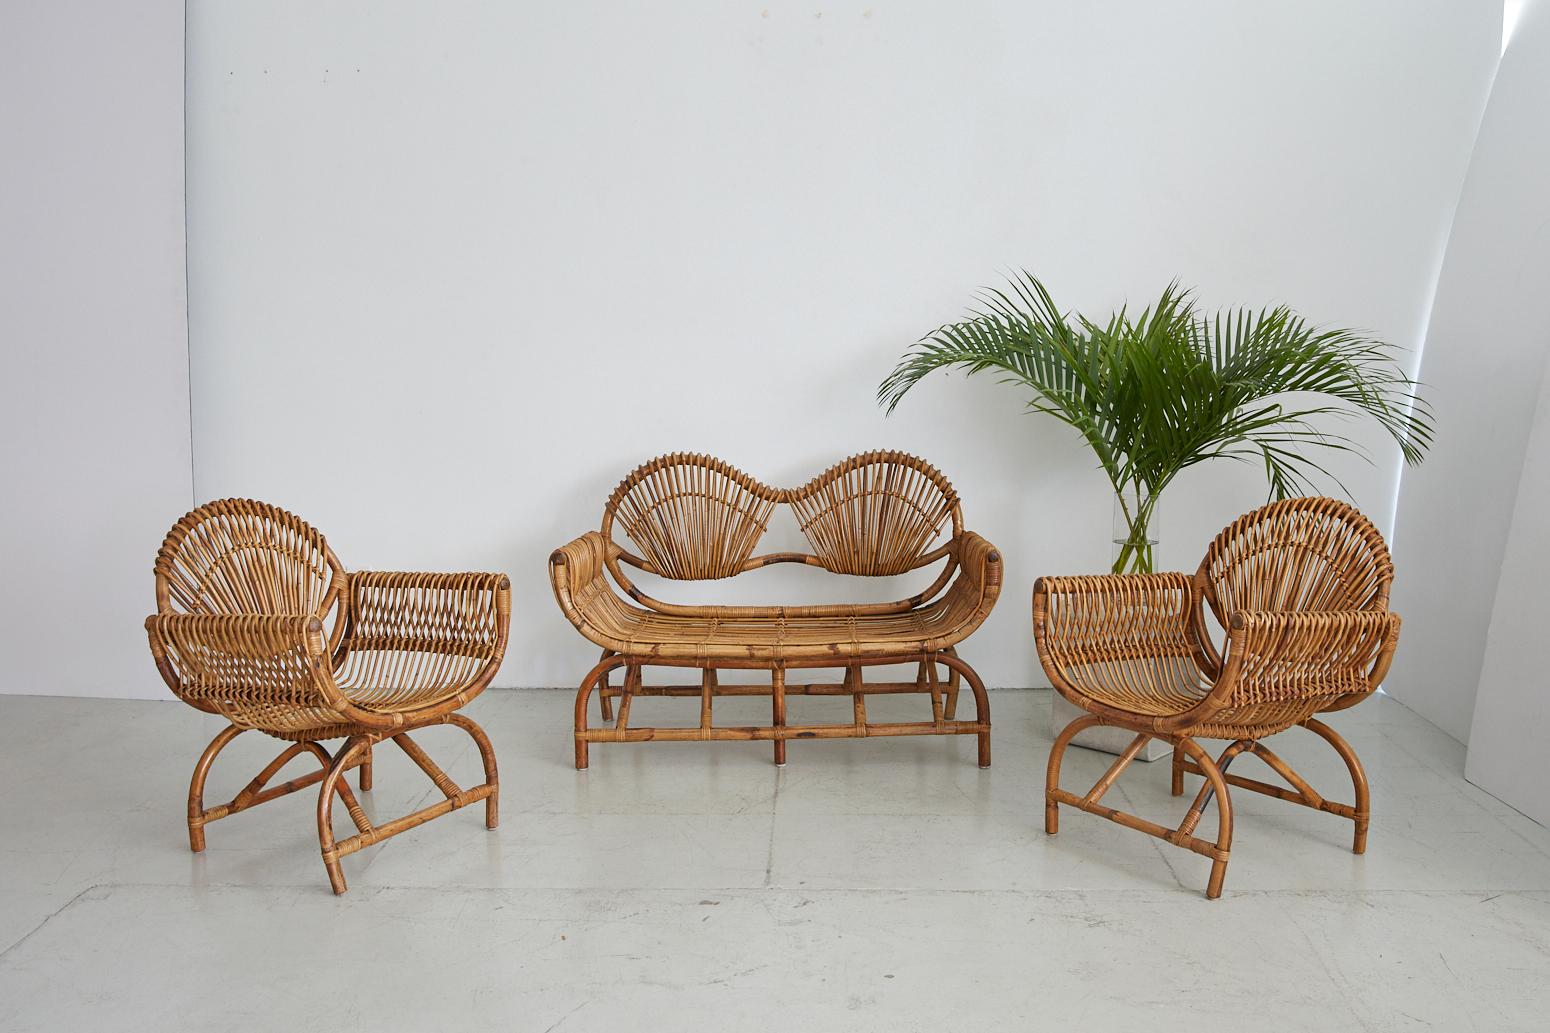 Beautiful set of Italian bamboo chairs and matching settee. Sculptural curved shape with scoop seats and bamboo 